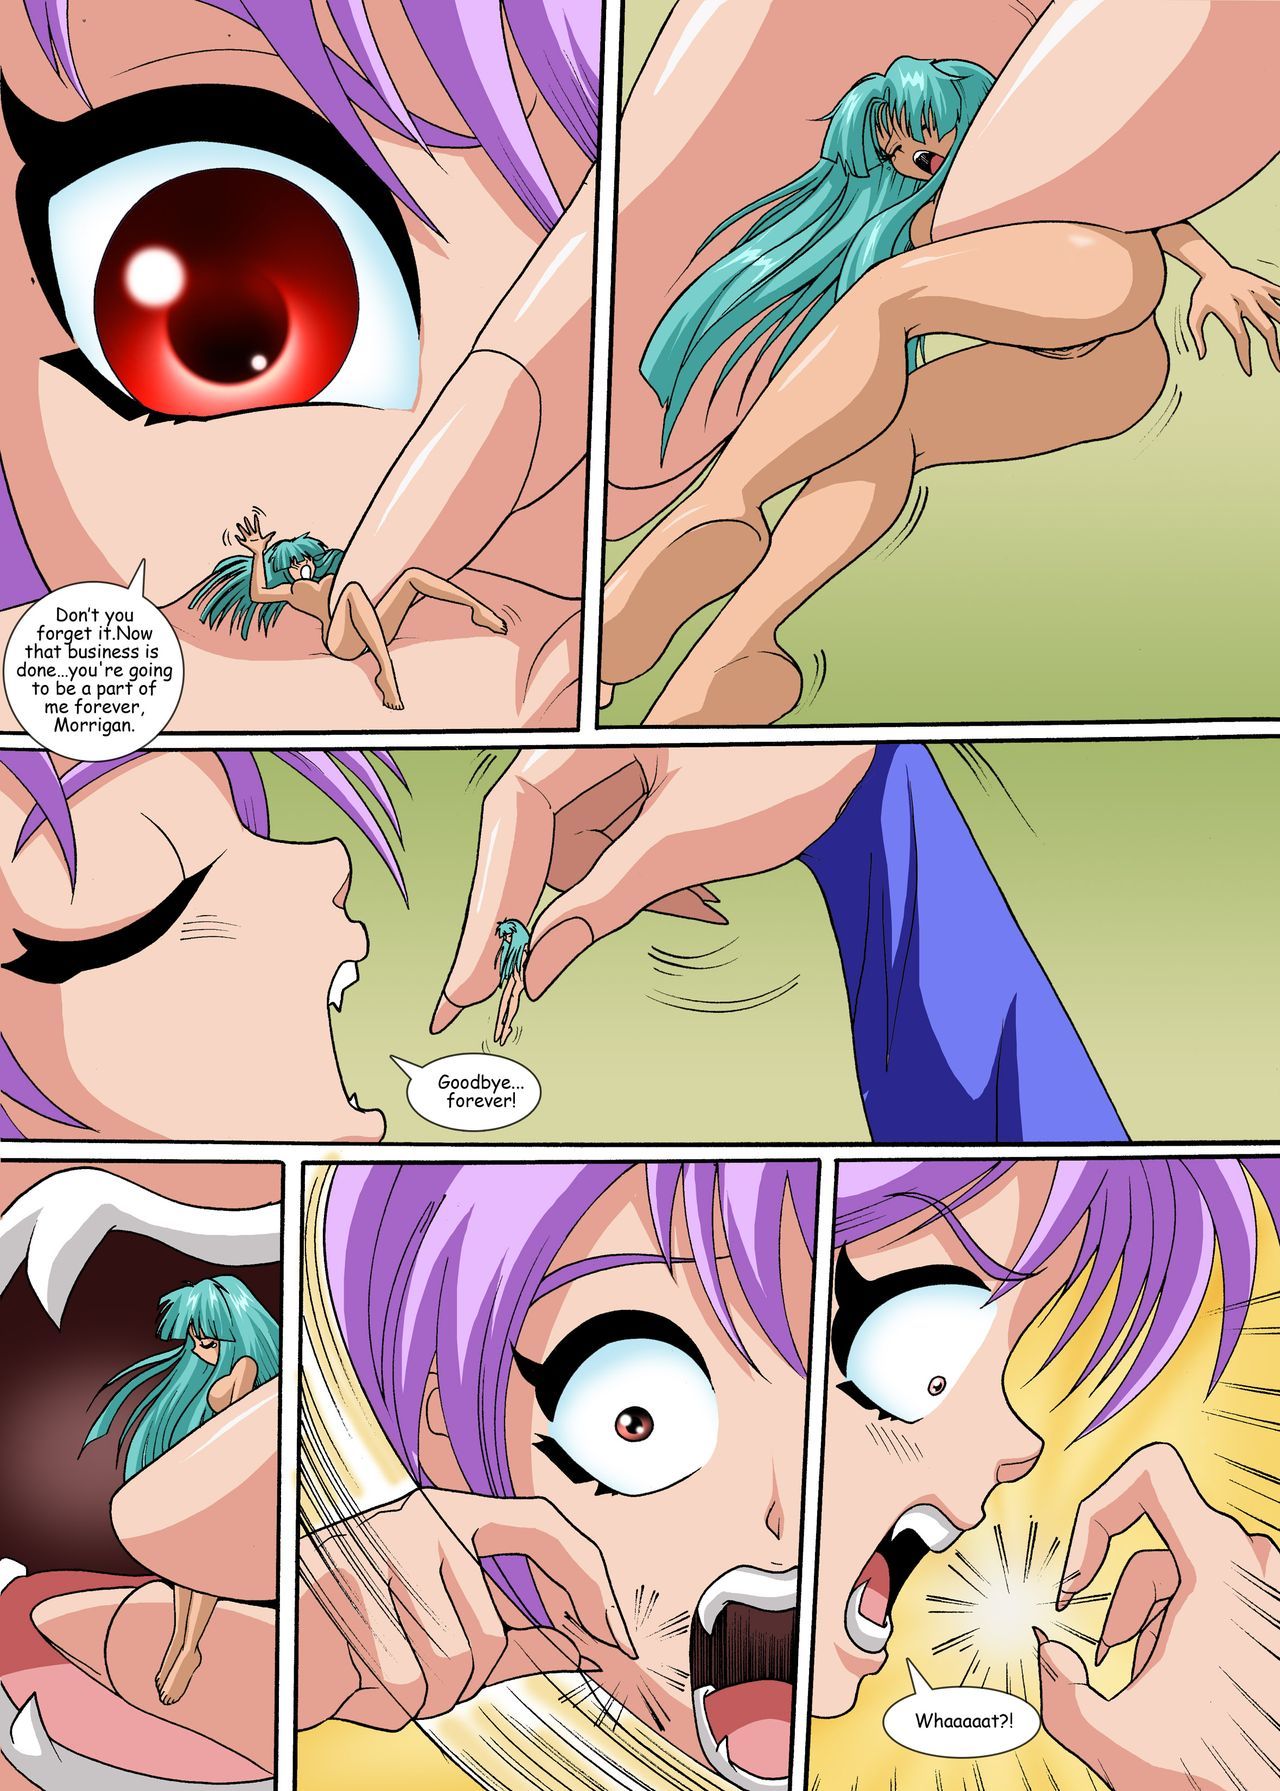 The Shrinking Succubus (Darkstalkers) by Palcomix page 19